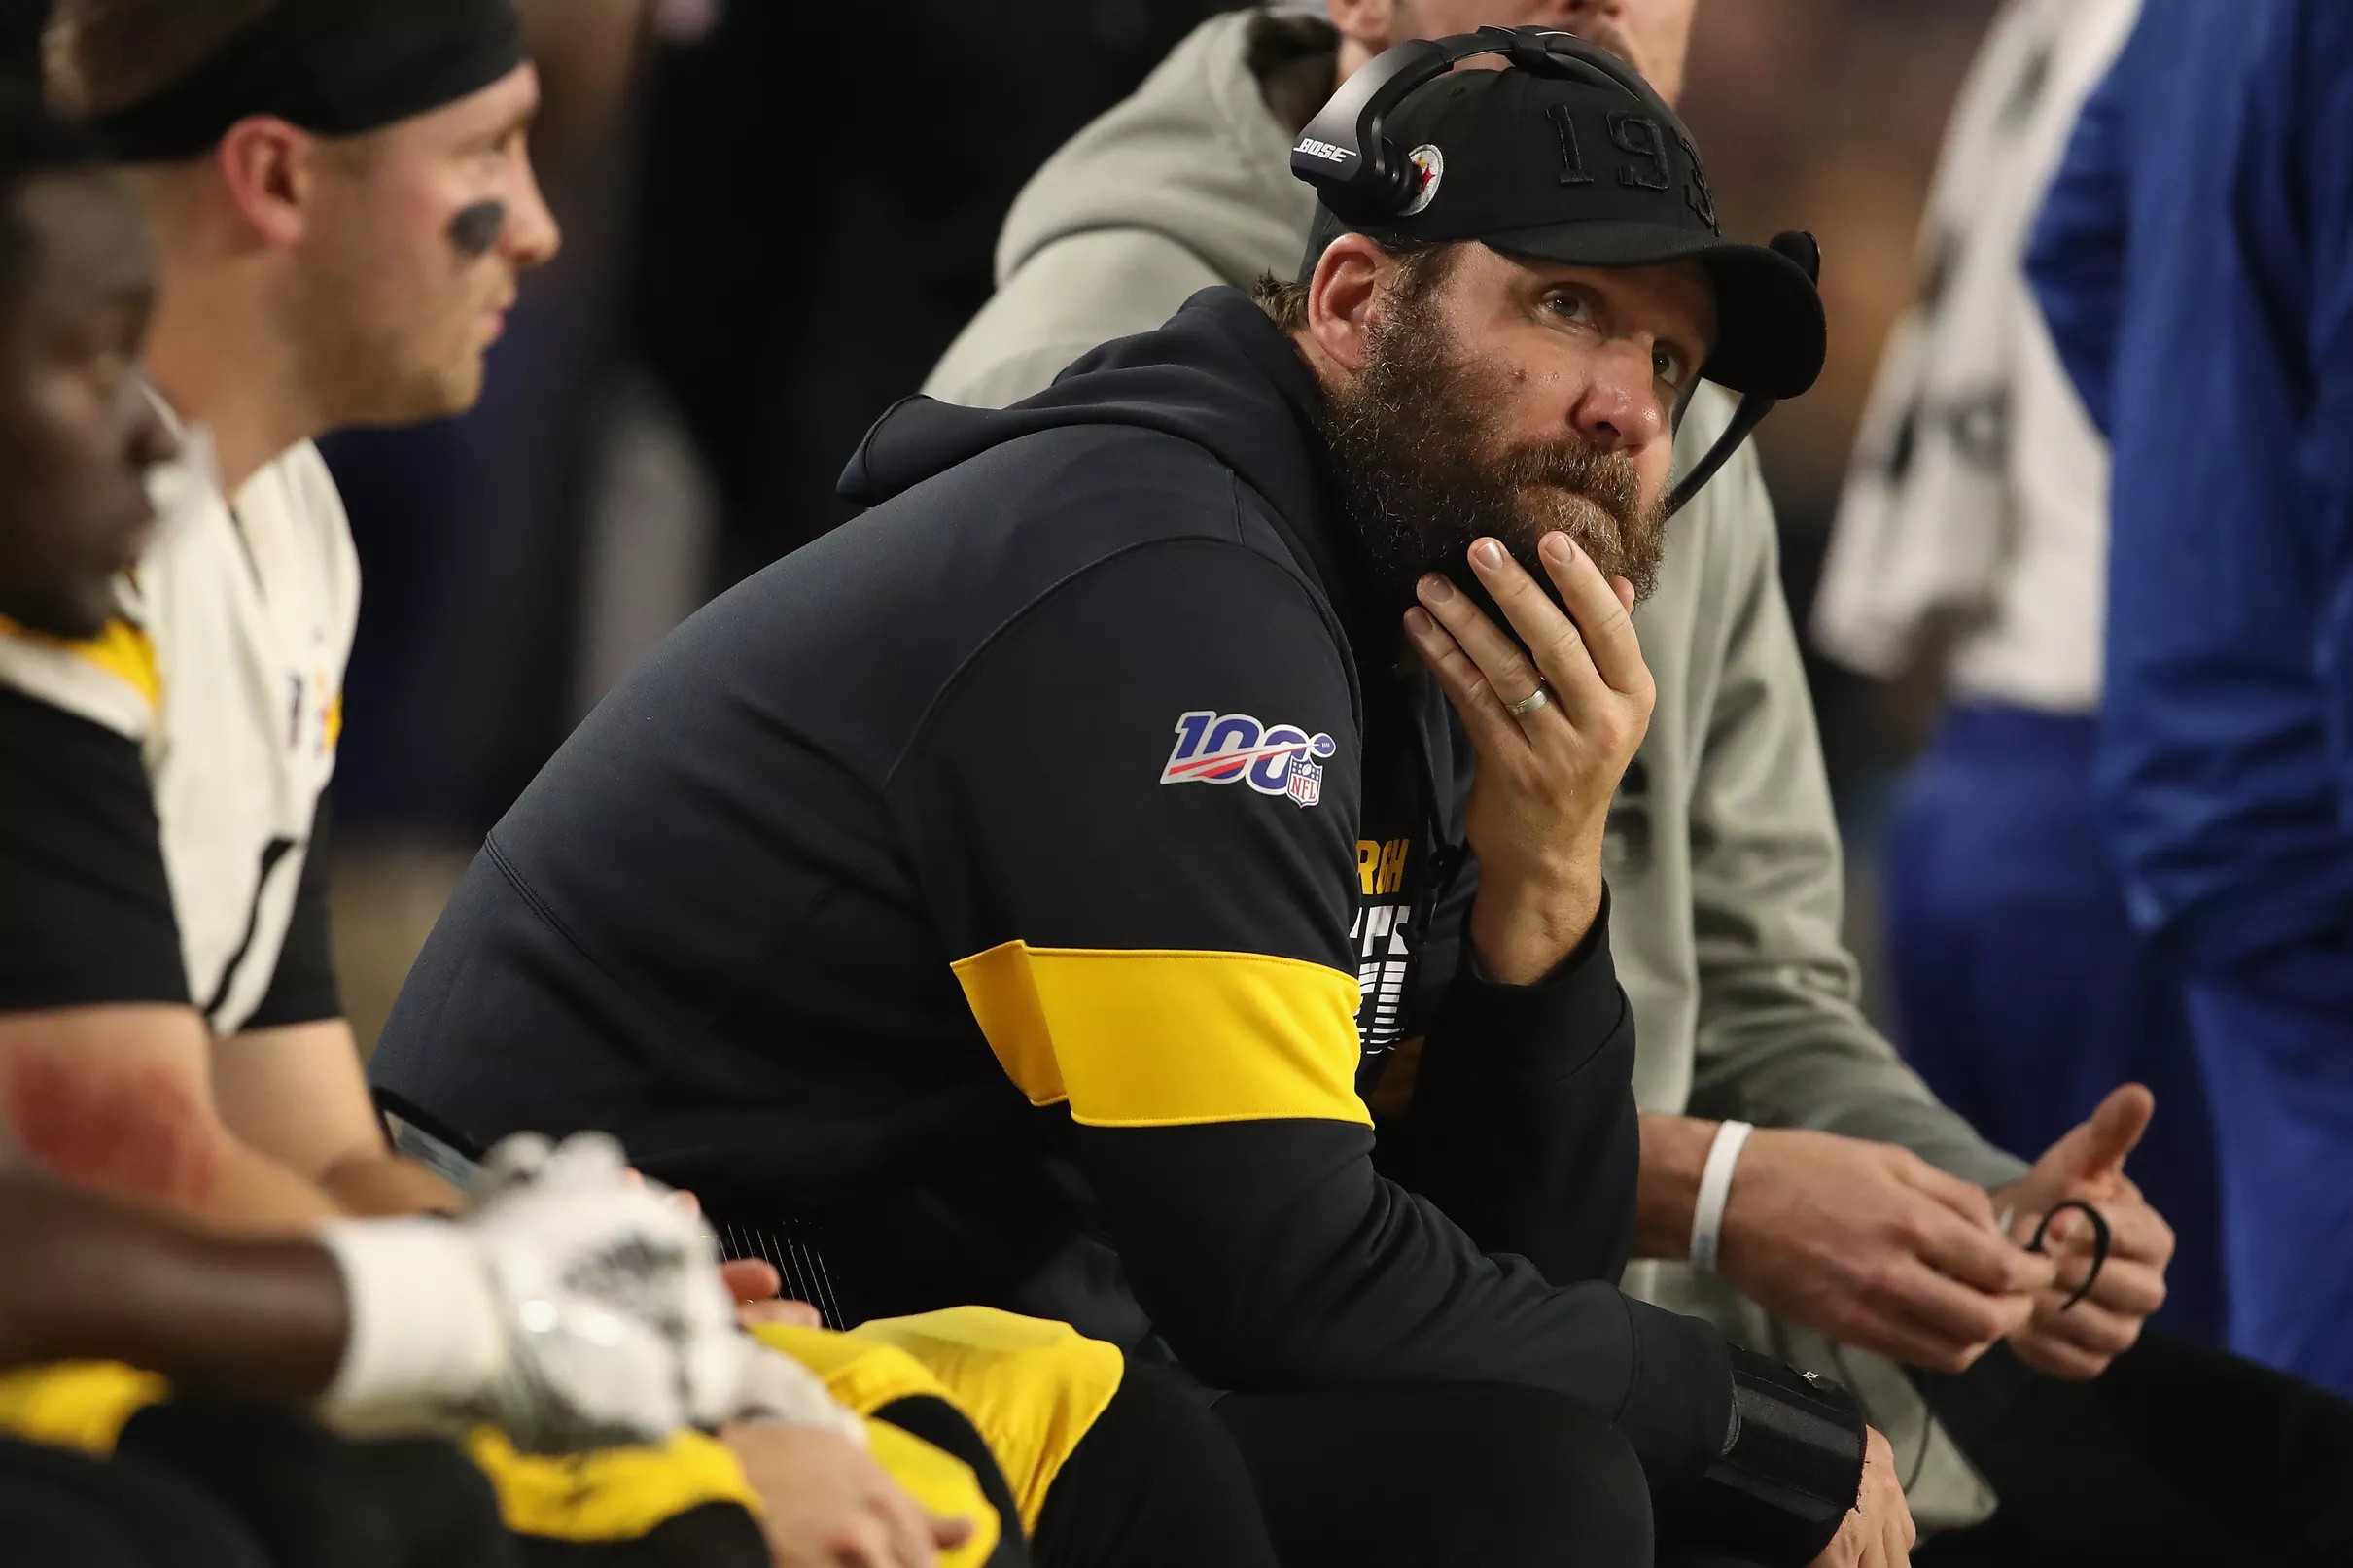 Ben Roethlisberger currently has the second highest NFL salary cap